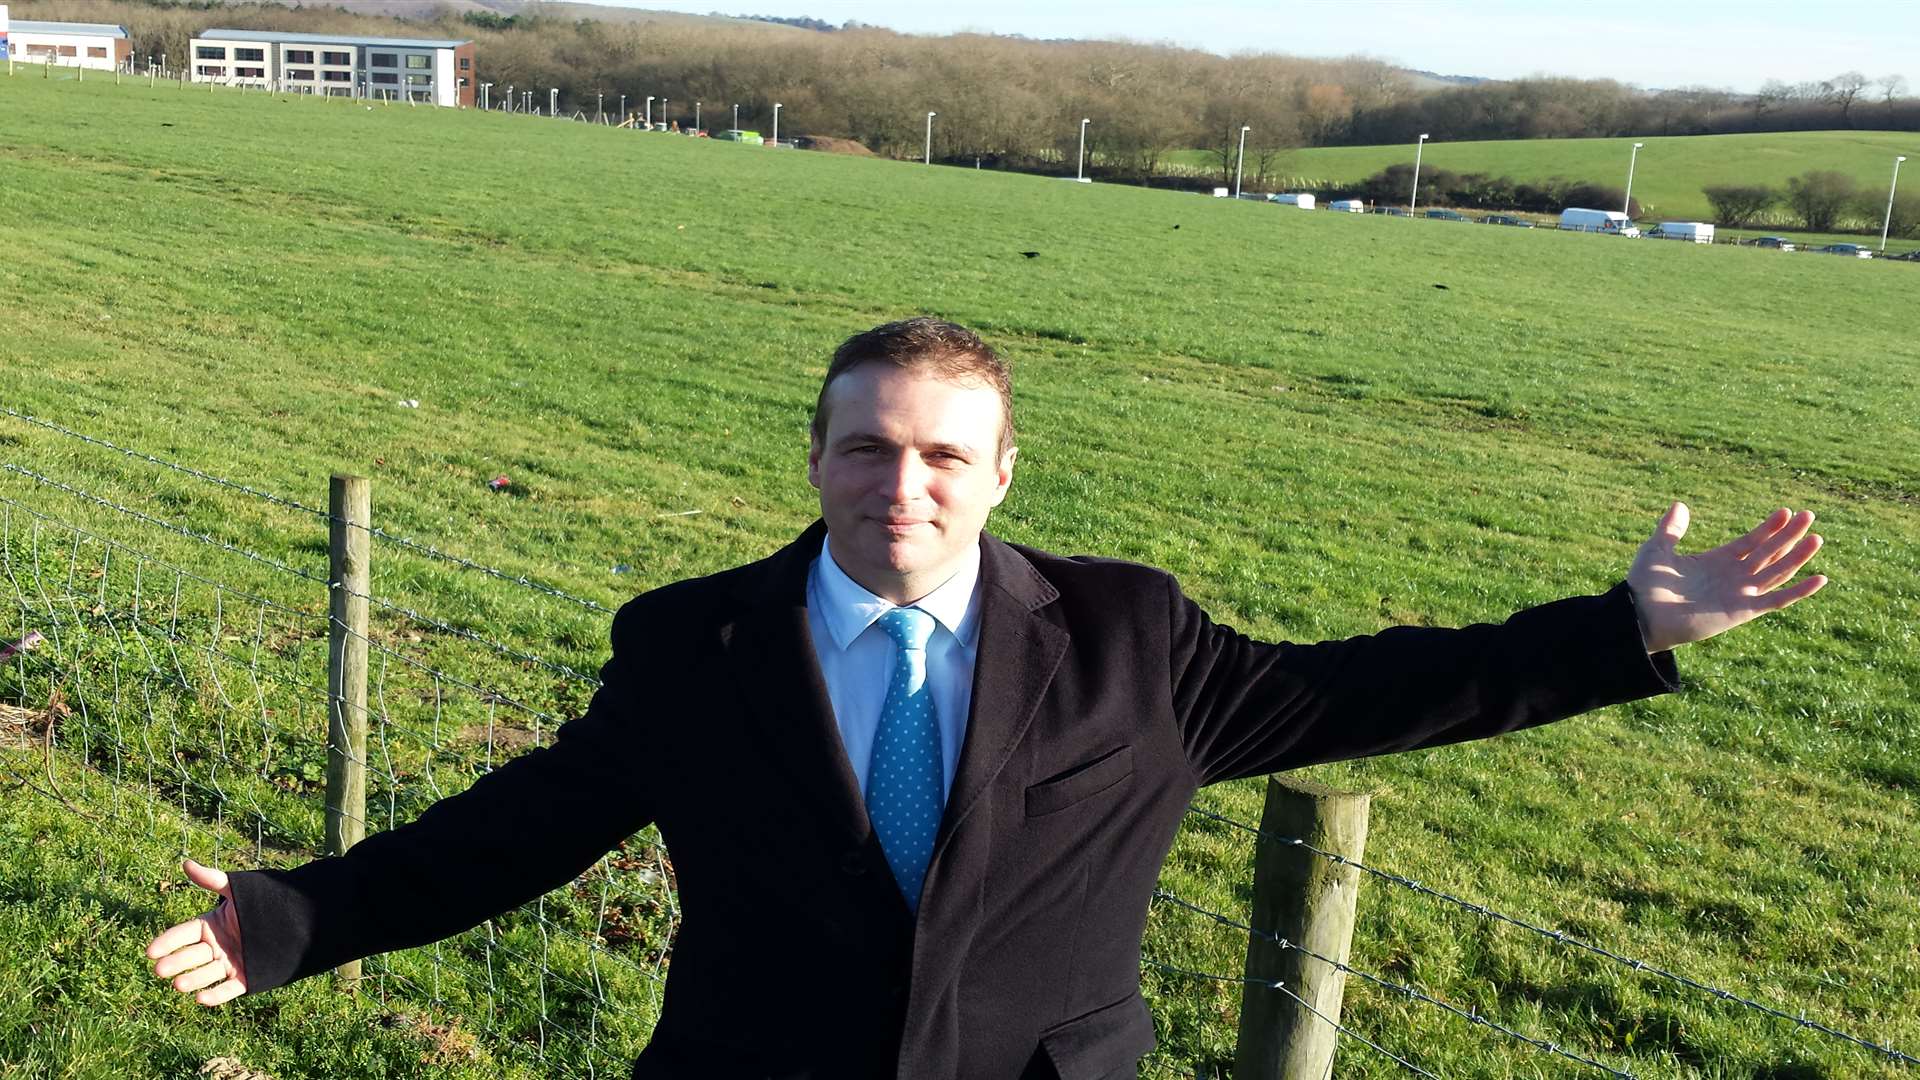 Land Securities' Chris Ward in front of land which will become a new Notcutts garden centre in the scheme